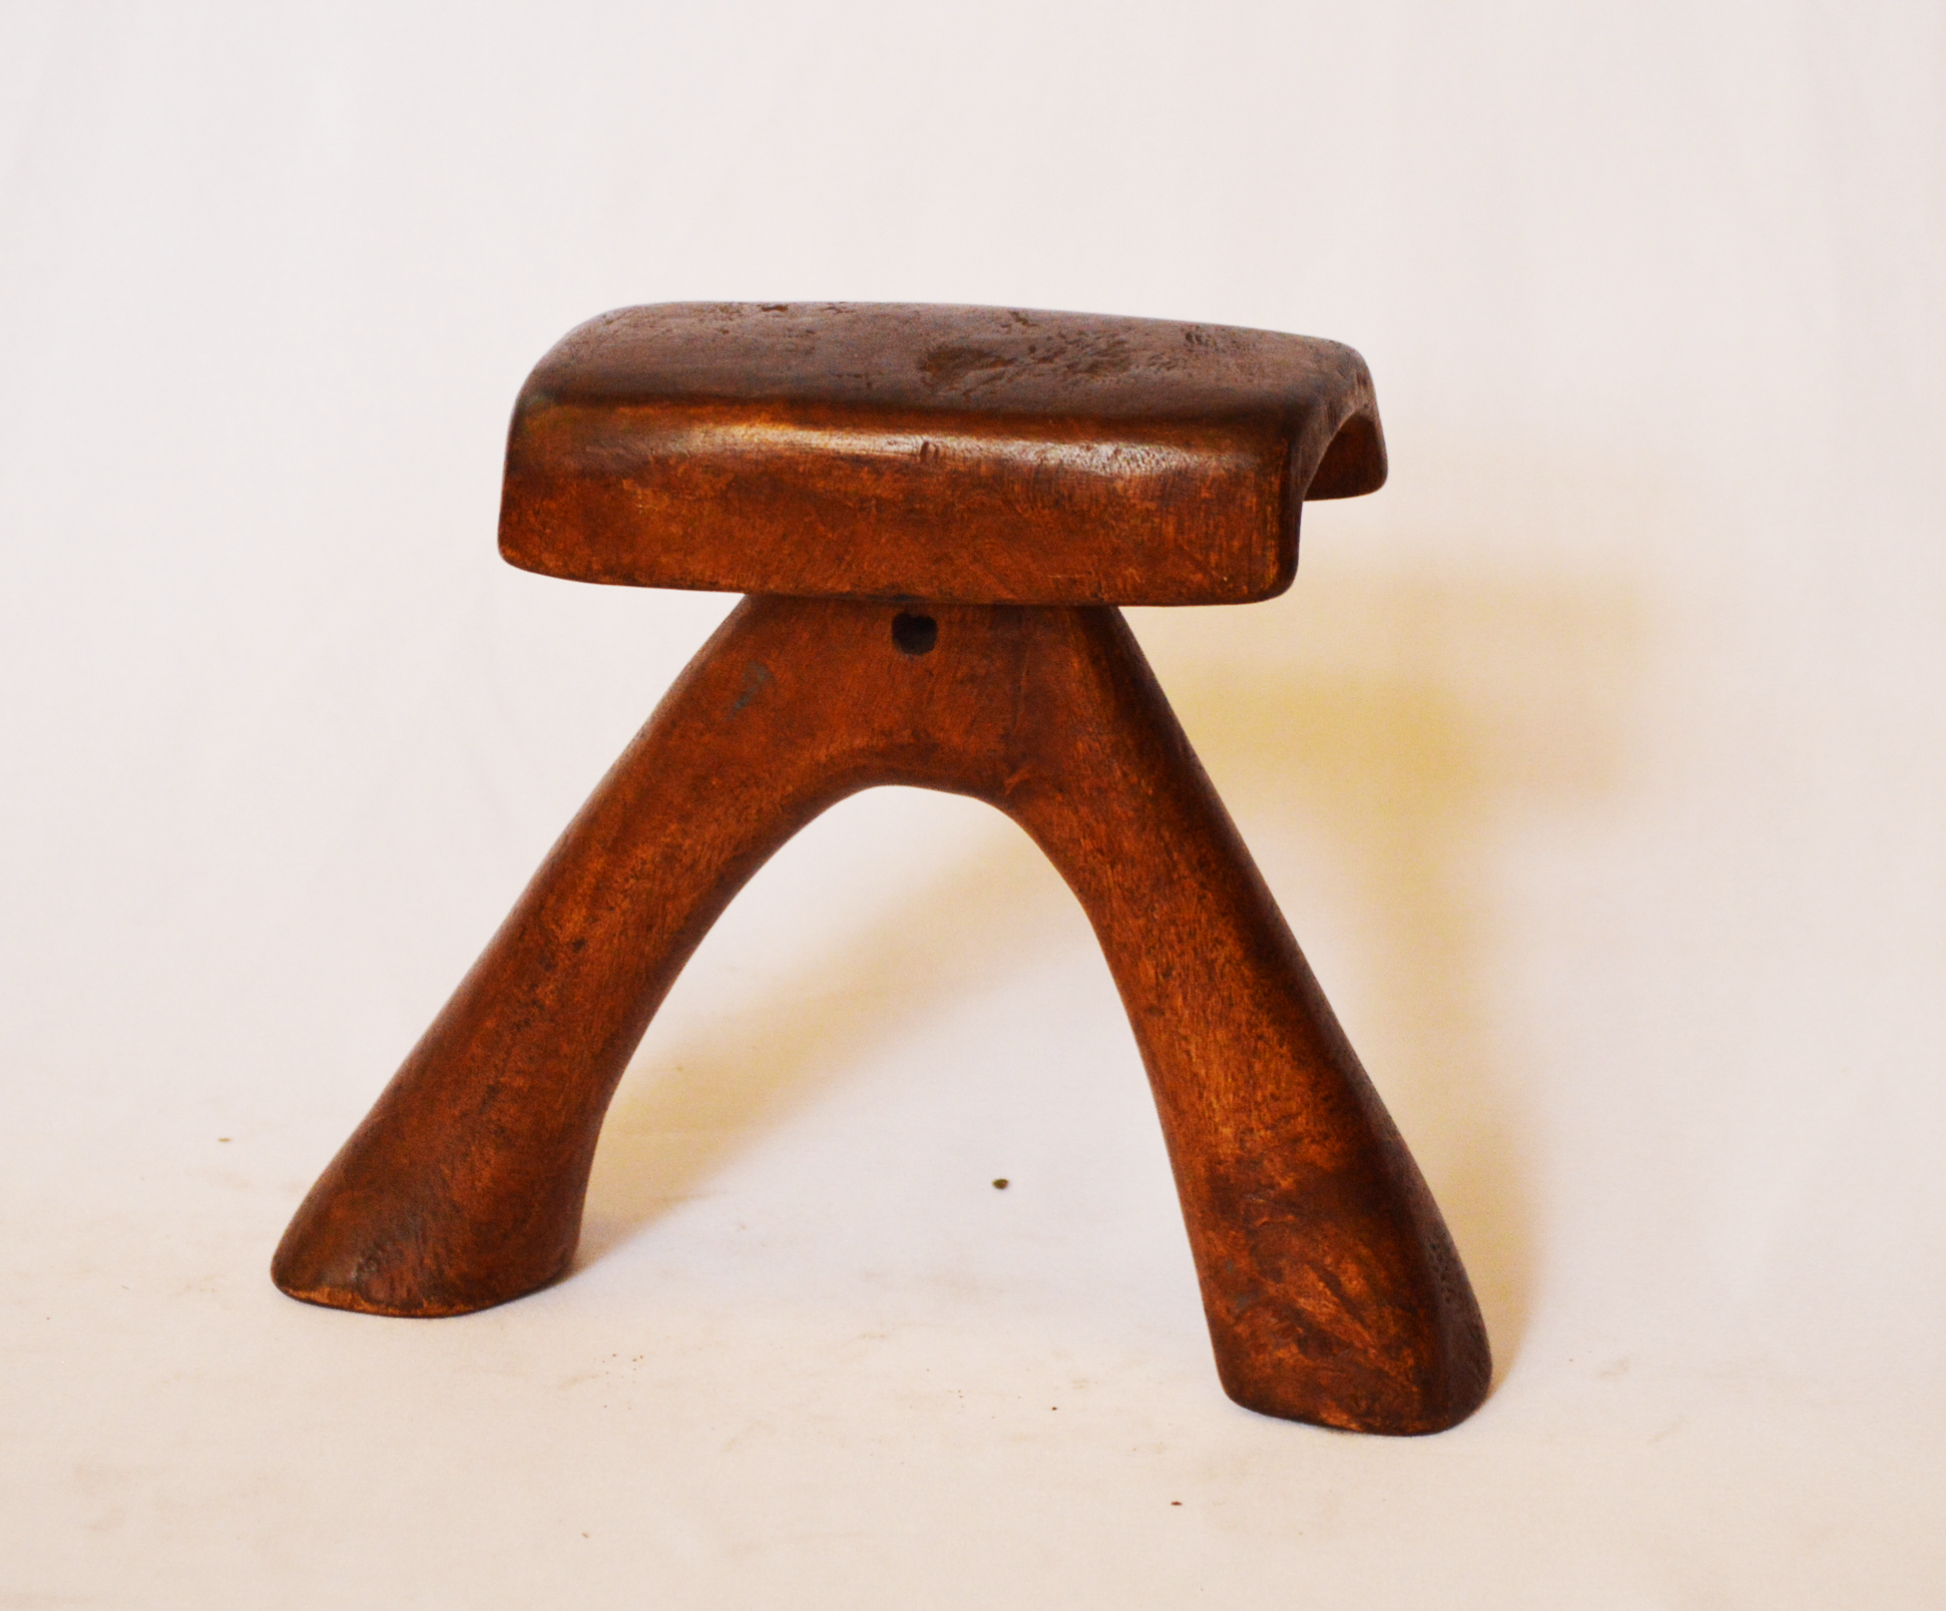 Tugen Headrest - Authentic African handicrafts | Clothing, bags, painting, toys & more - CULTURE HUB by Muthoni Unchained